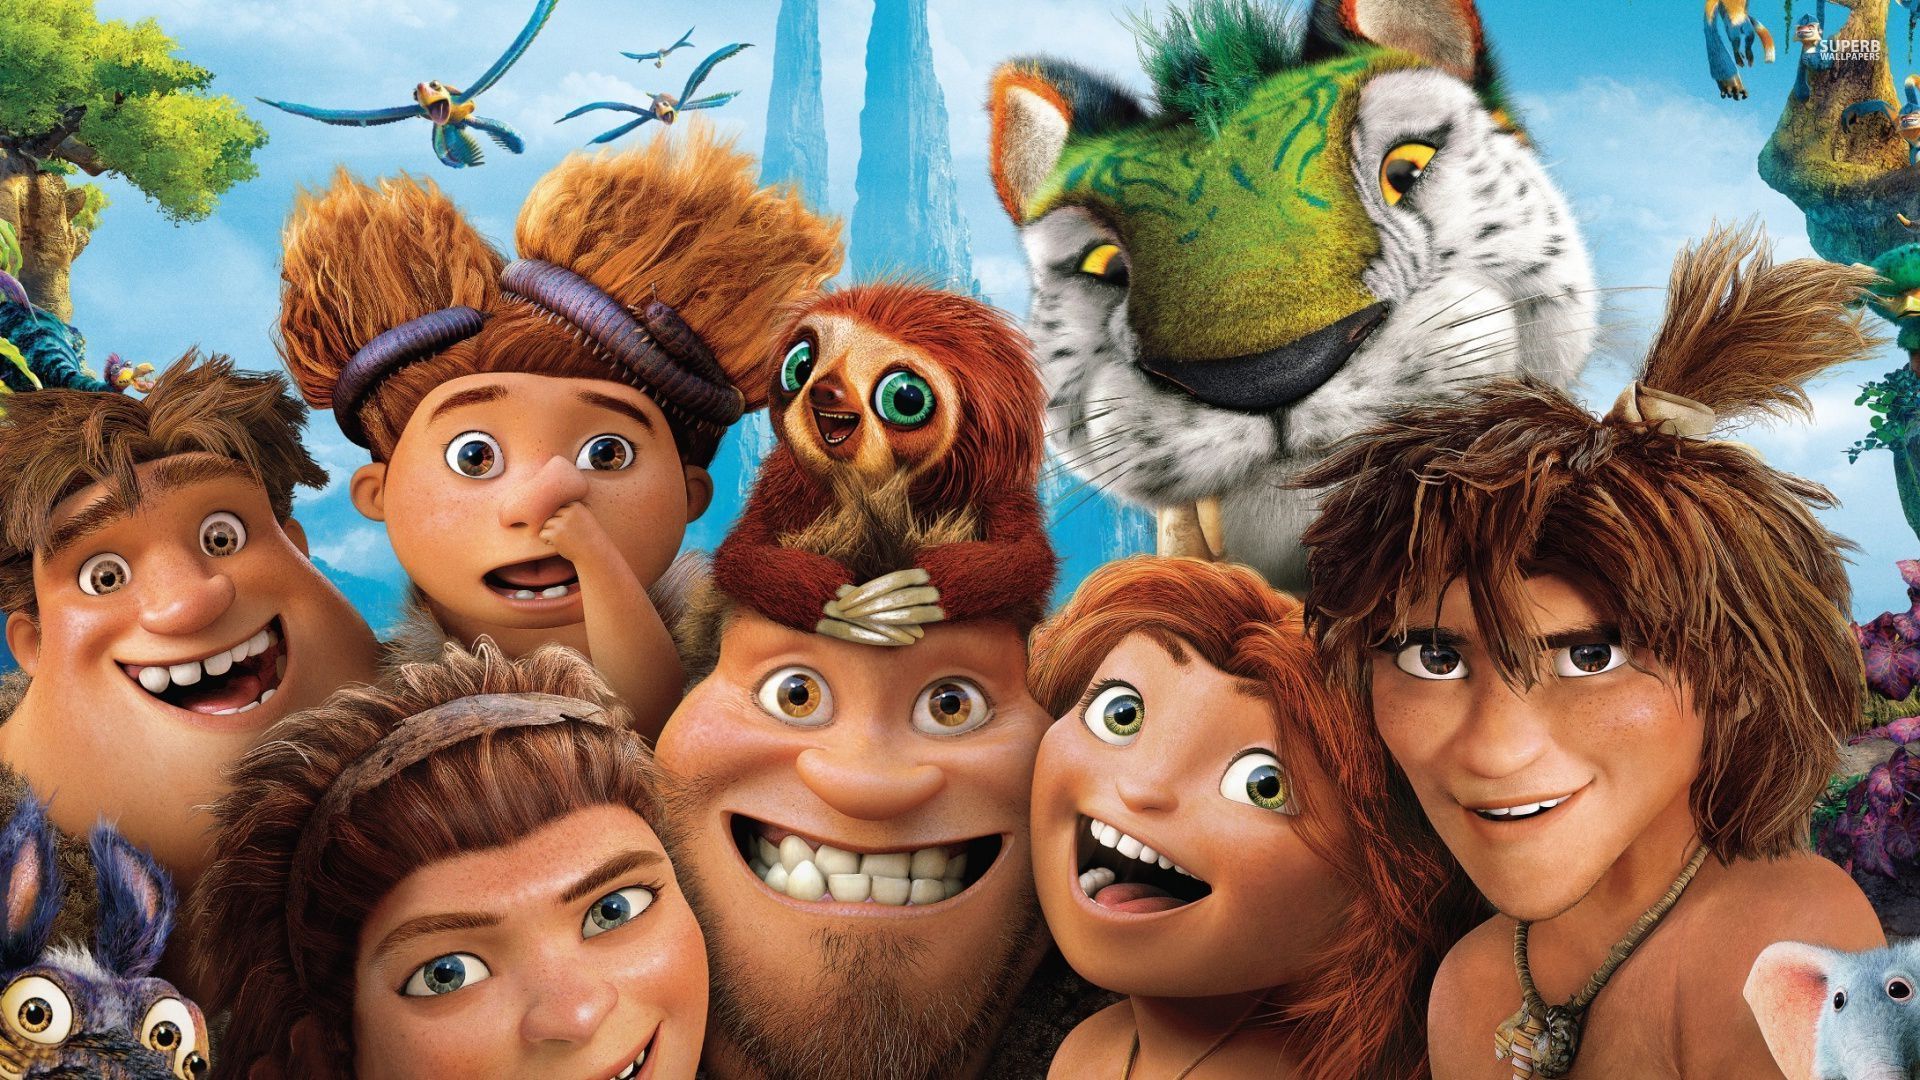 The Croods: A New Age. VIEW Conference 2020